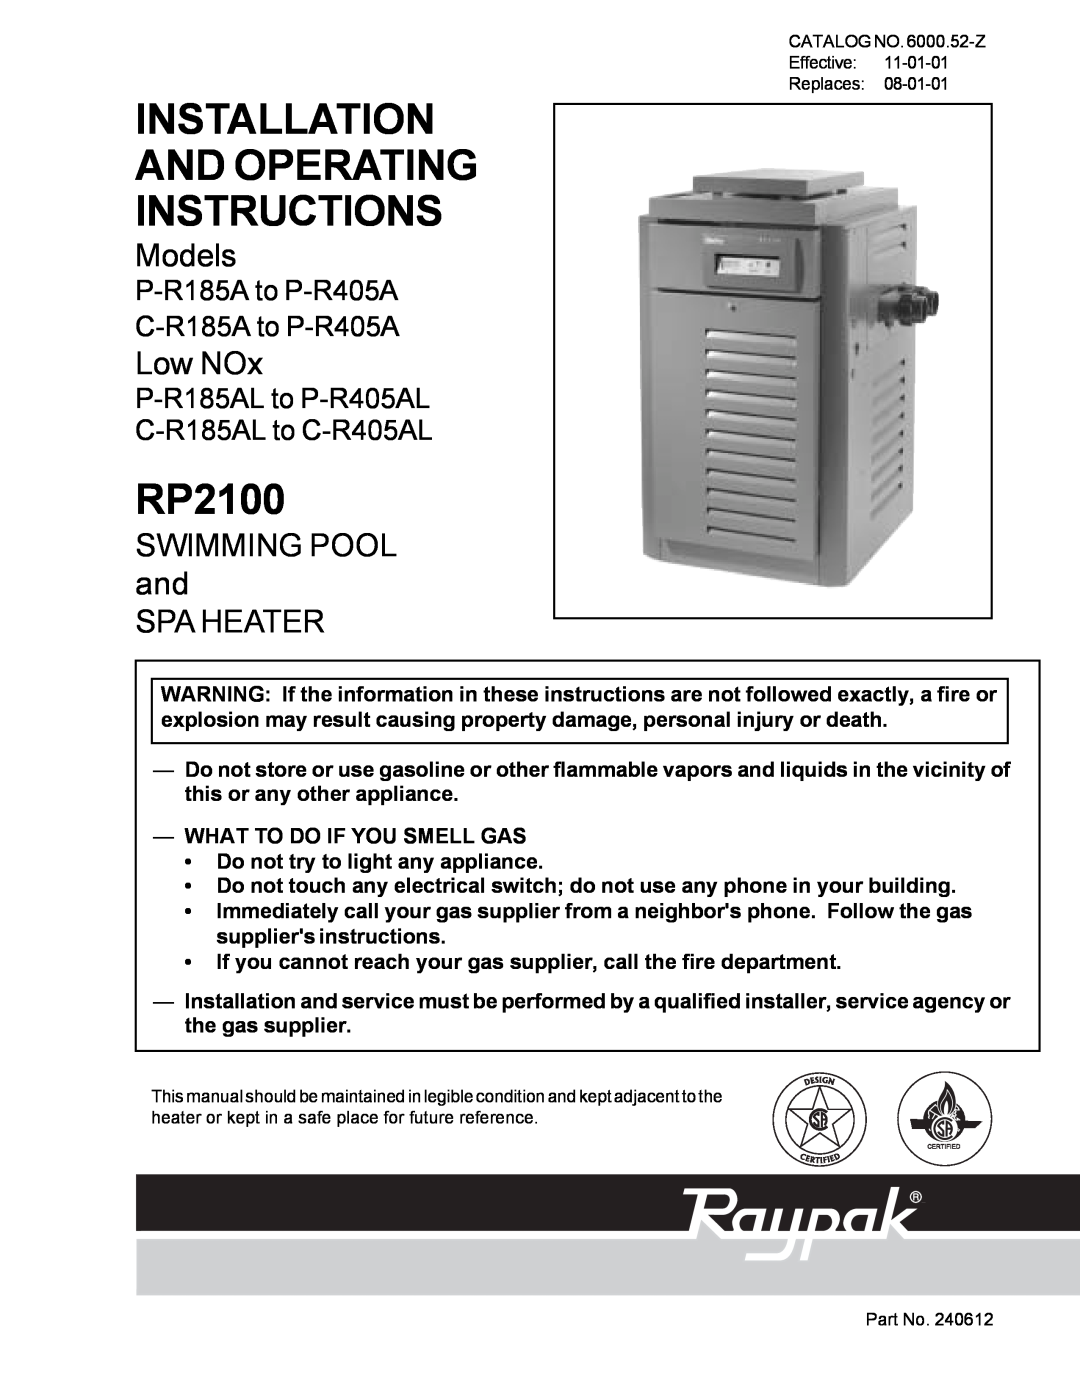 Aqua Products RP2100, P-R185A, P-R405A, C-R185A, P-R405A manual Installation And Operating Instructions, Models, Low NOx 